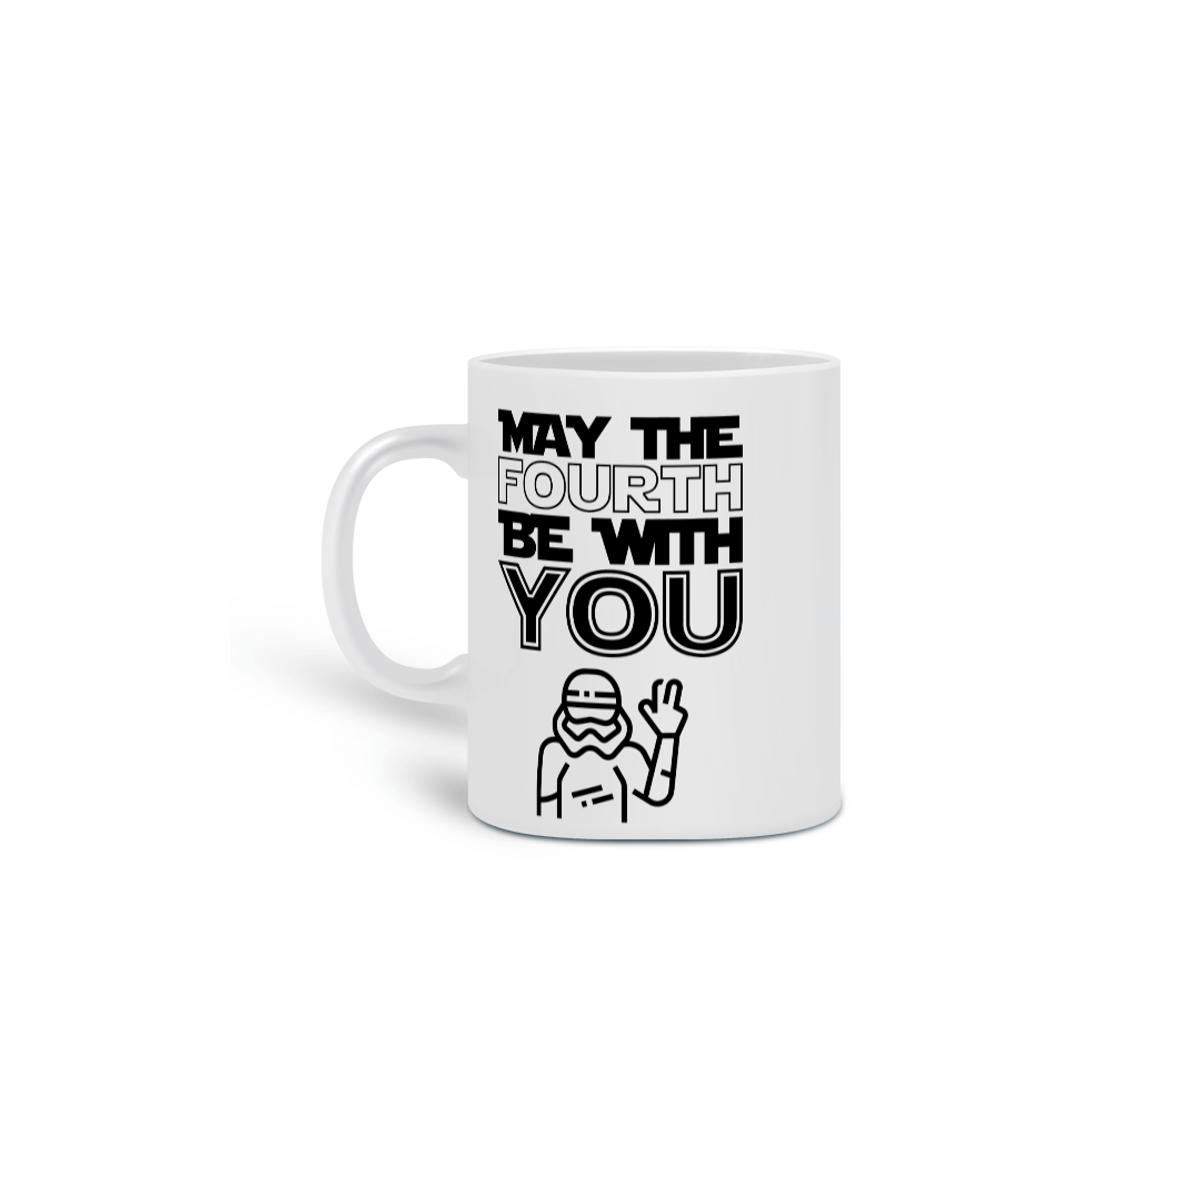 Nome do produto: Caneca May The Fourth Be With You